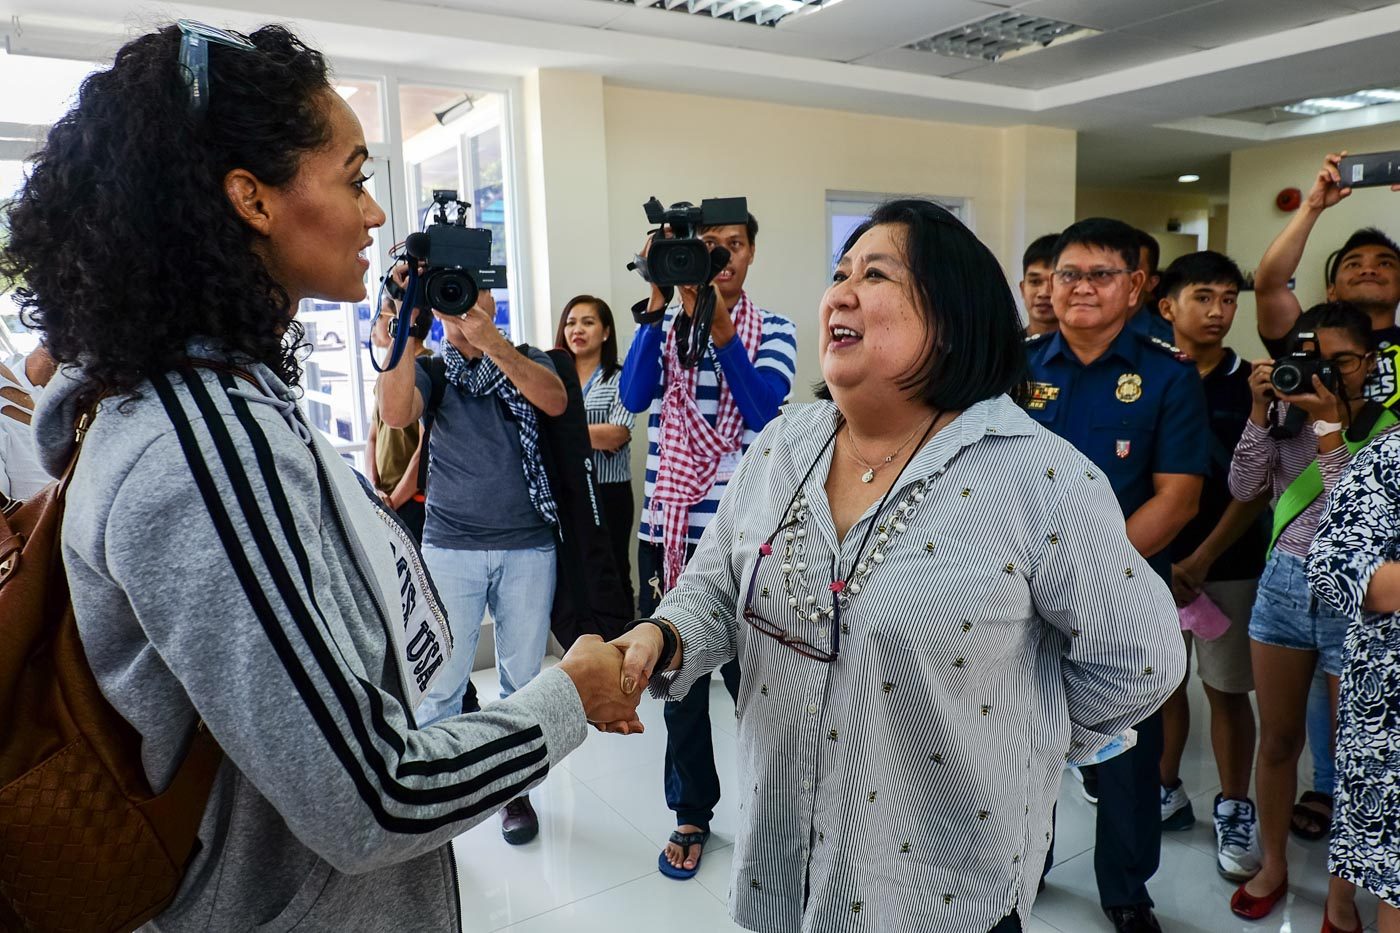 OFFICIAL WELCOME. Miss USA Kára McCullough is welcomed by Camiguin Governor Maria Luisa Romualdo  